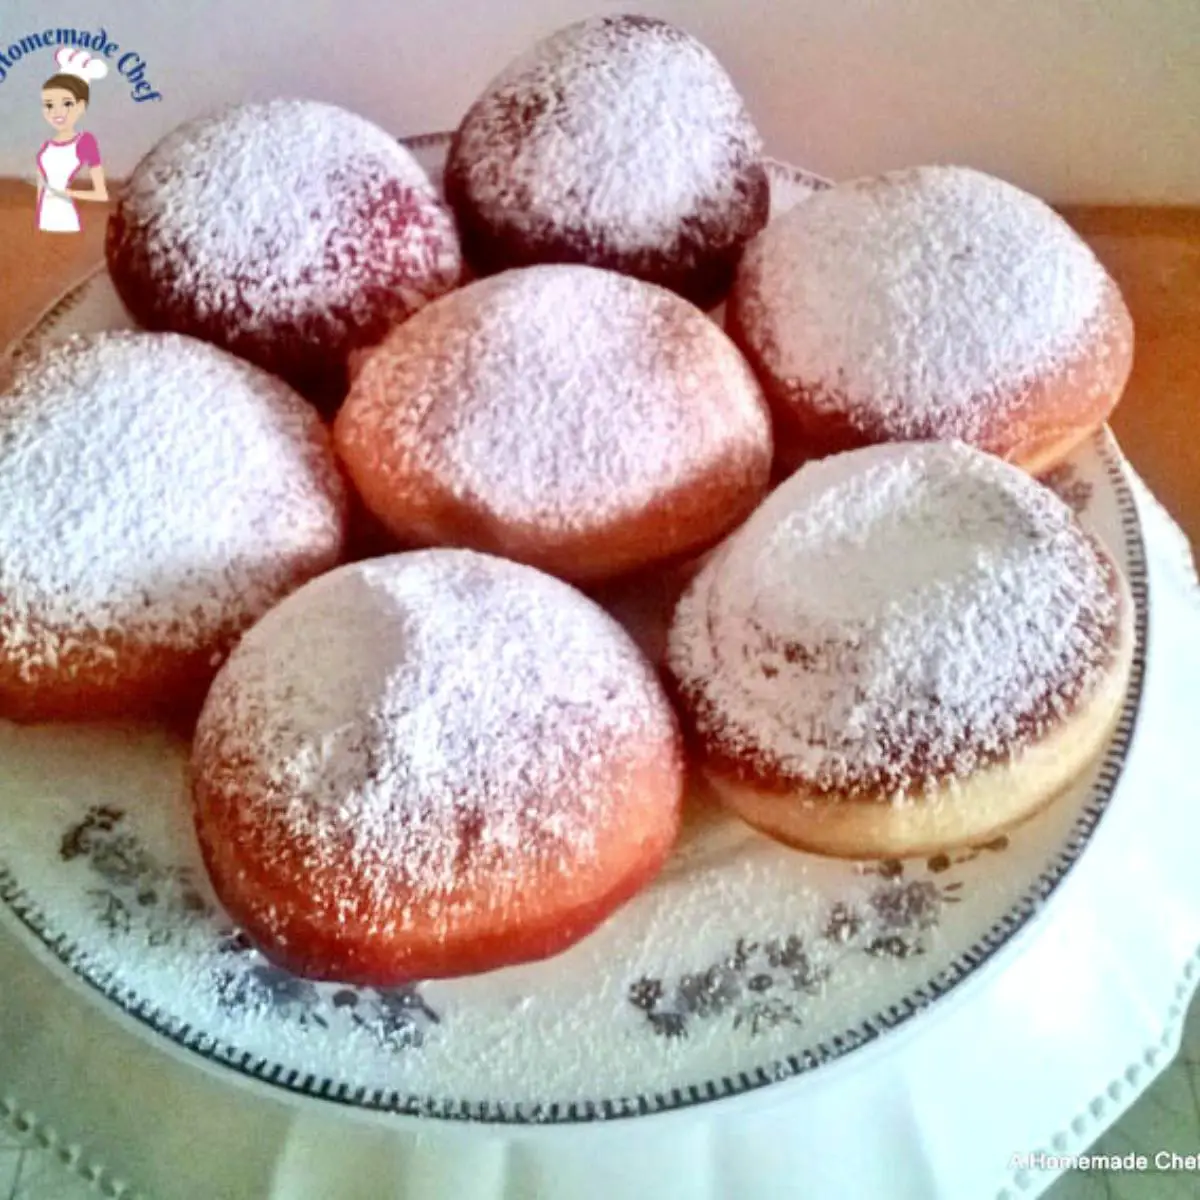 A plate with doughnuts and powdered sugar.